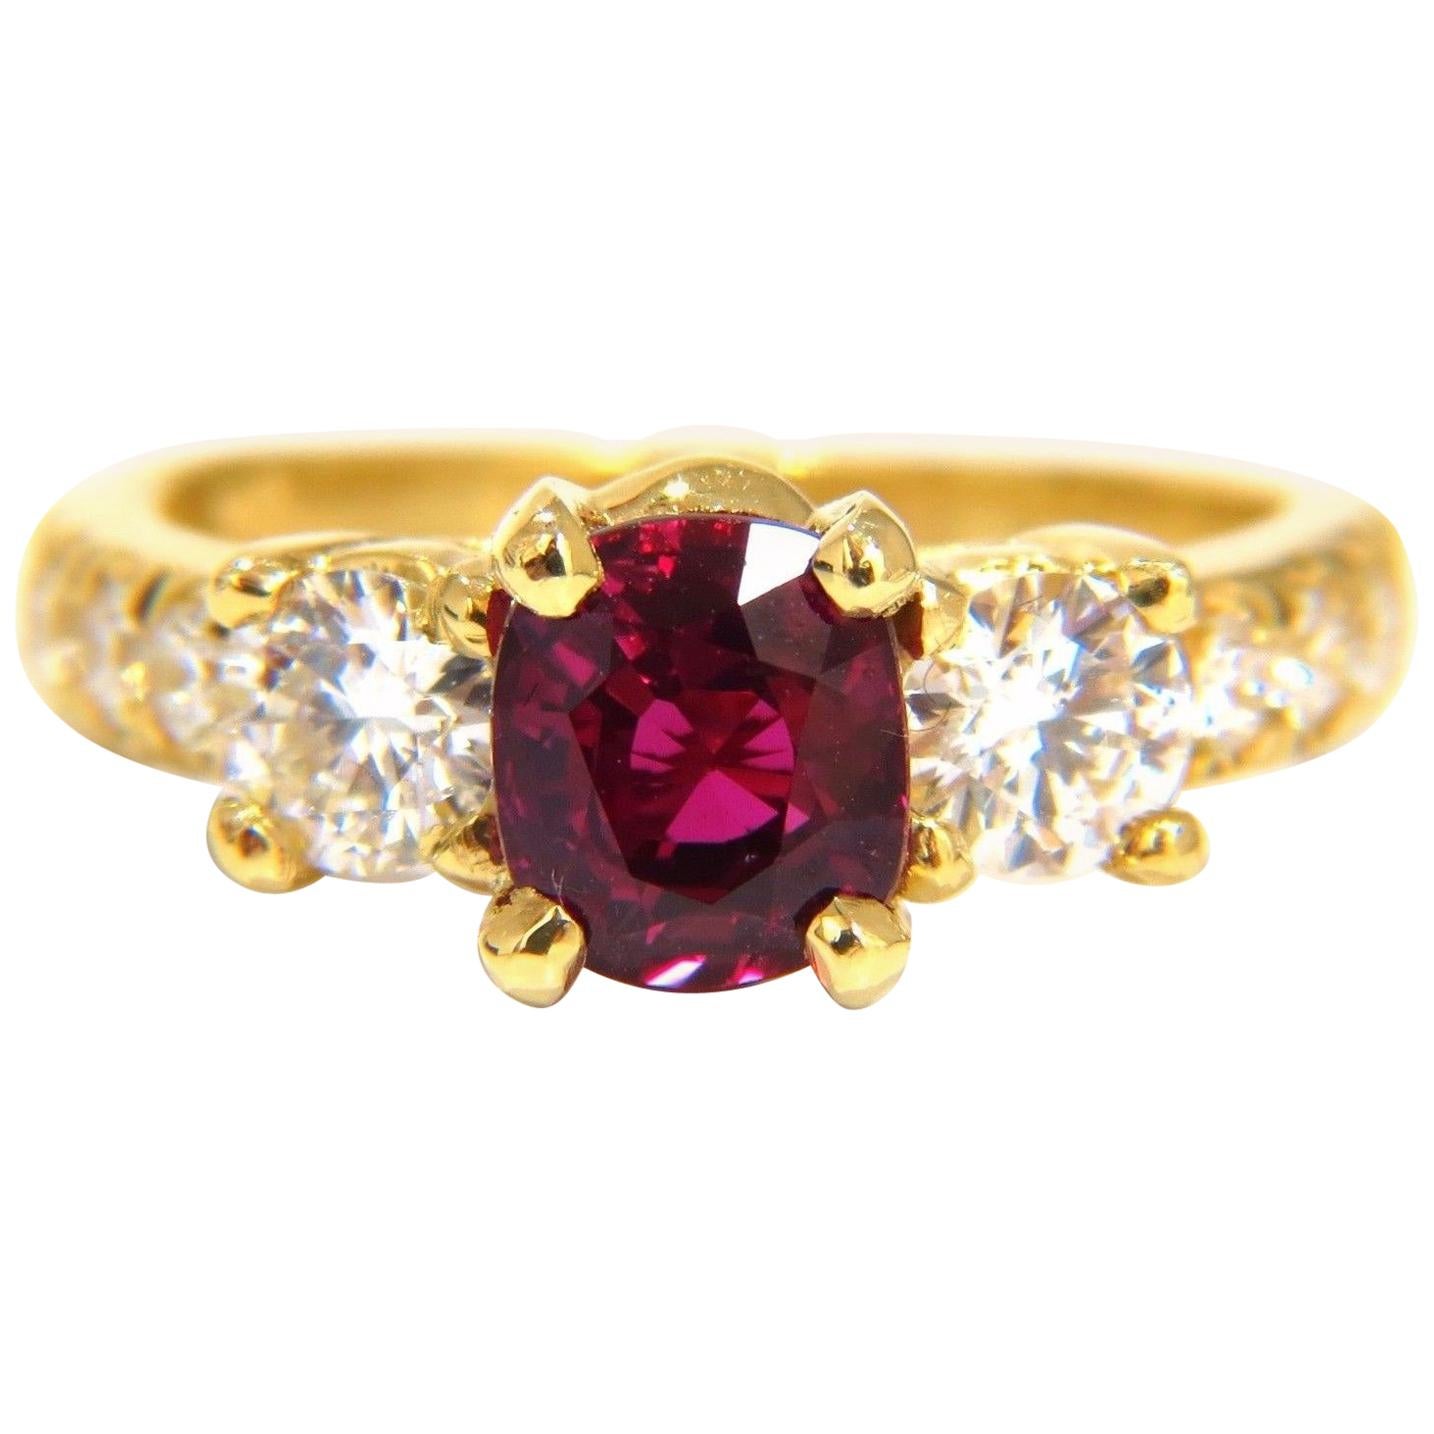 GIA Certified 2.12ct cushion cut vivid red ruby 1.06ct diamonds ring 18kt For Sale